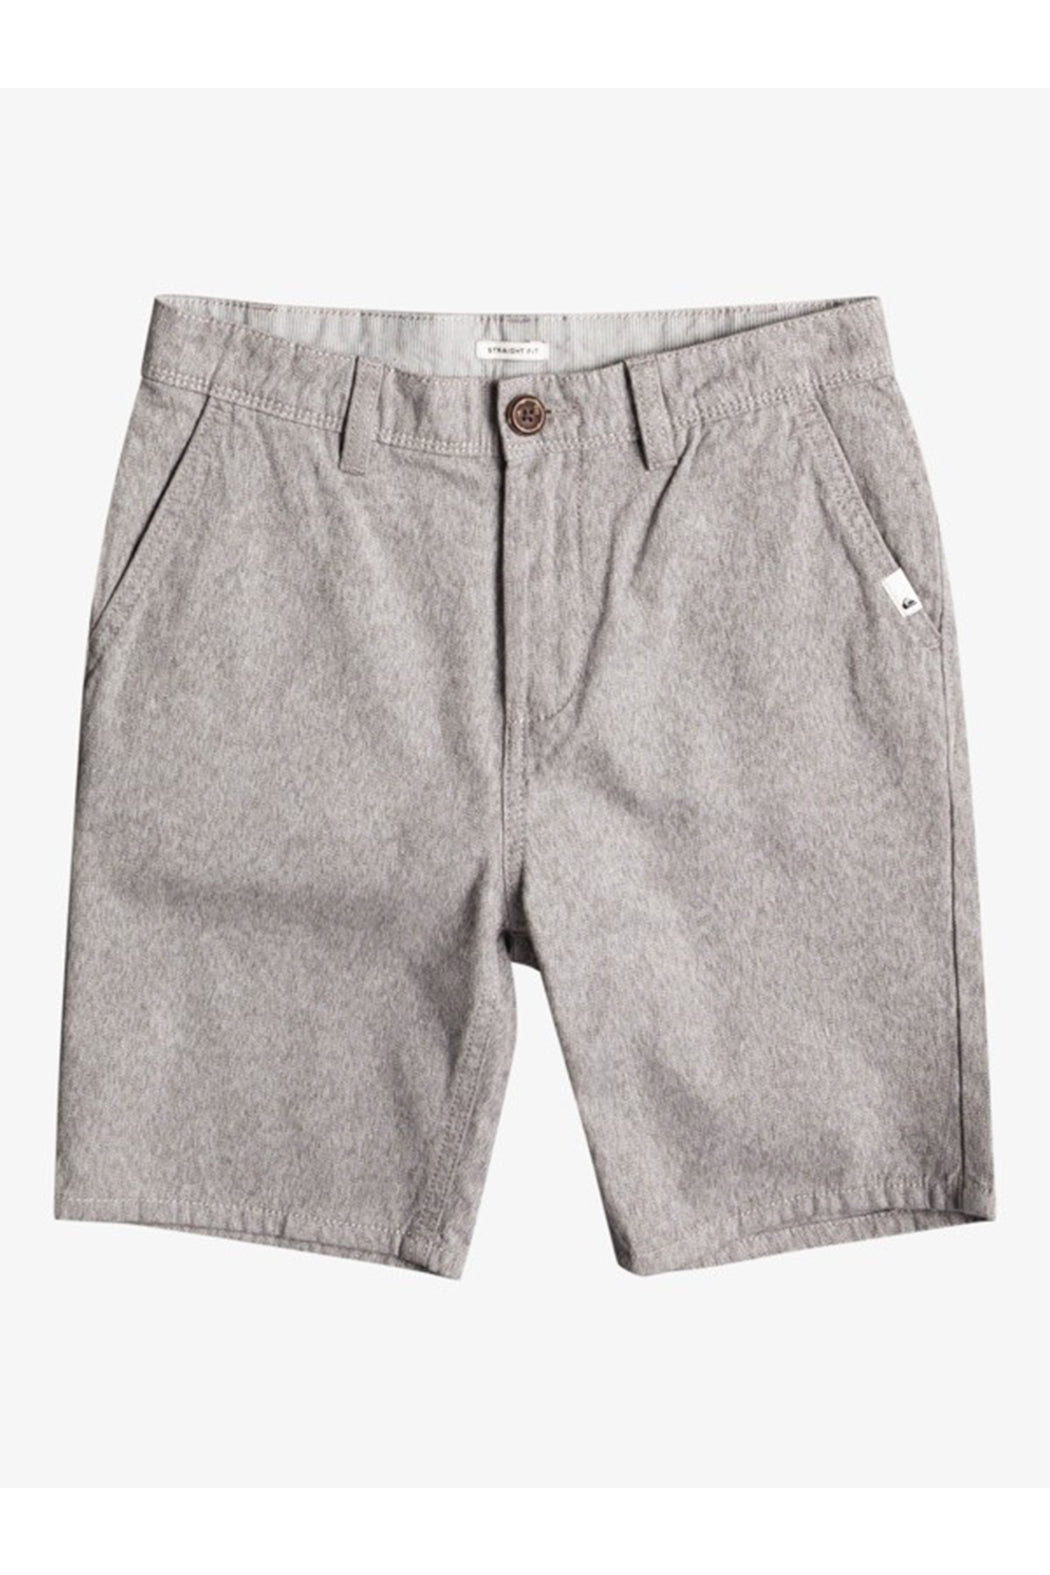 Quiksilver Everyday 17" Chino Shorts 8-16